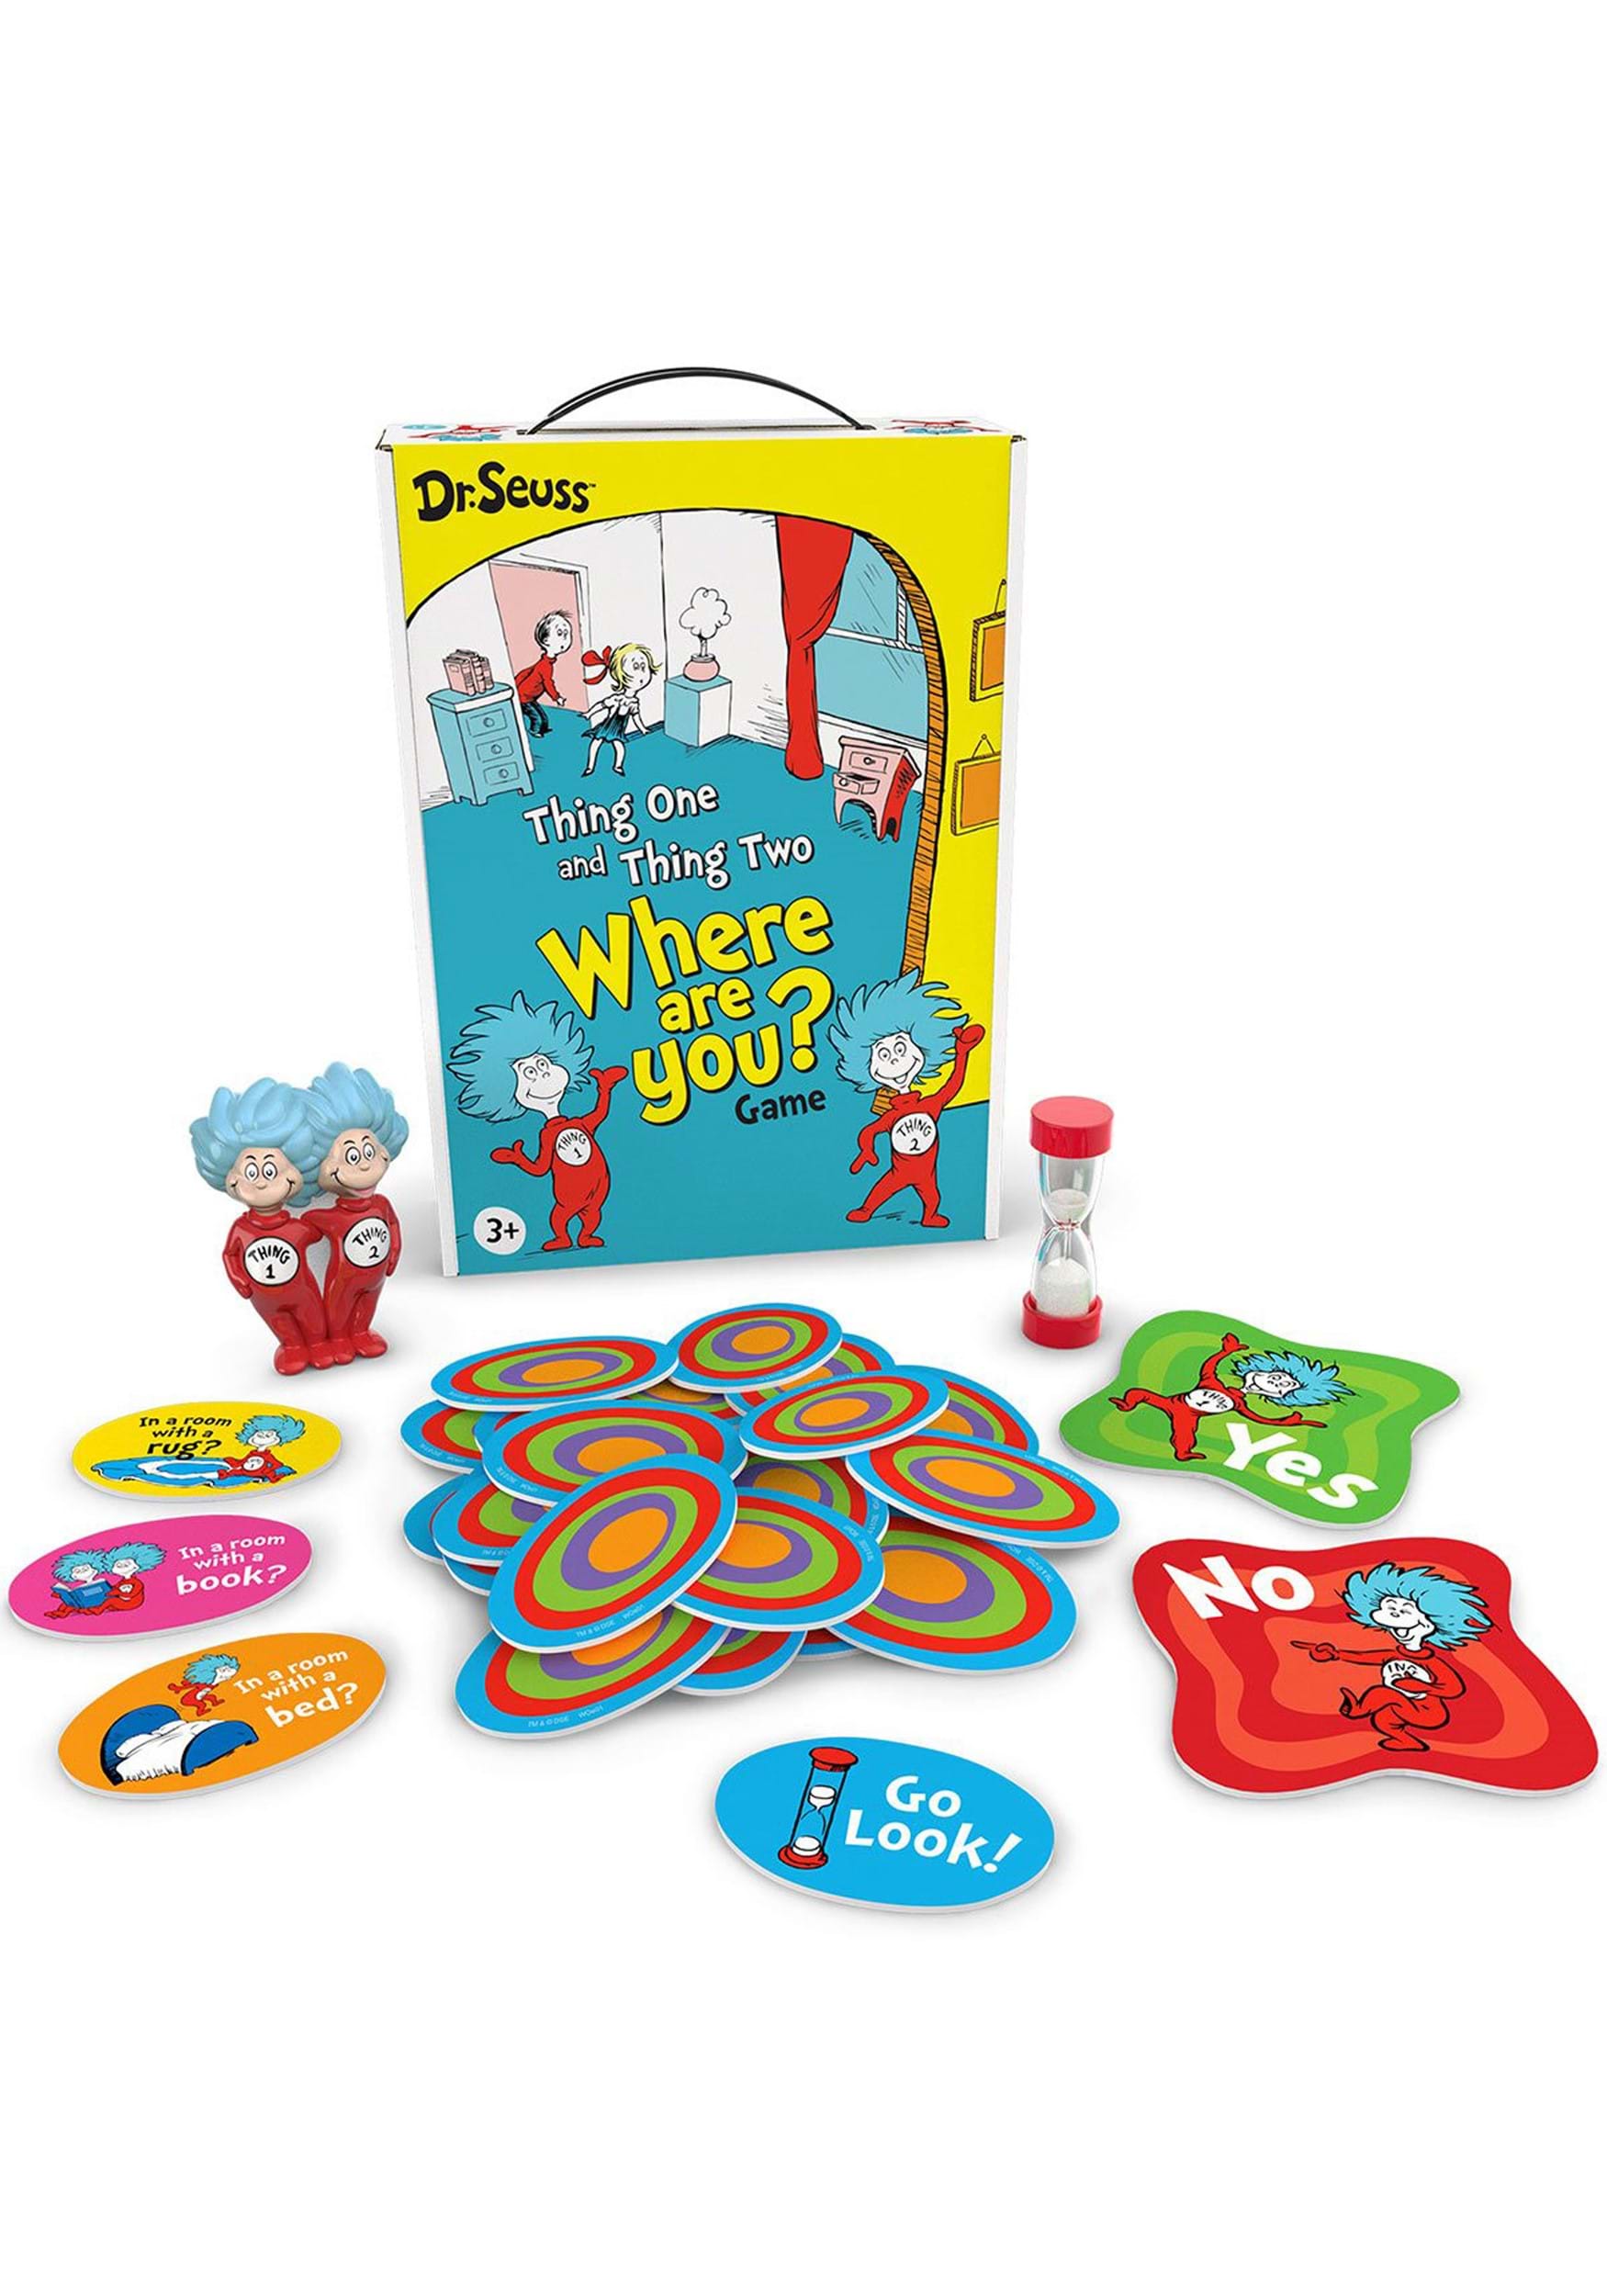 Dr. Seuss Thing 1 & Thing 2 Where Are You? Game